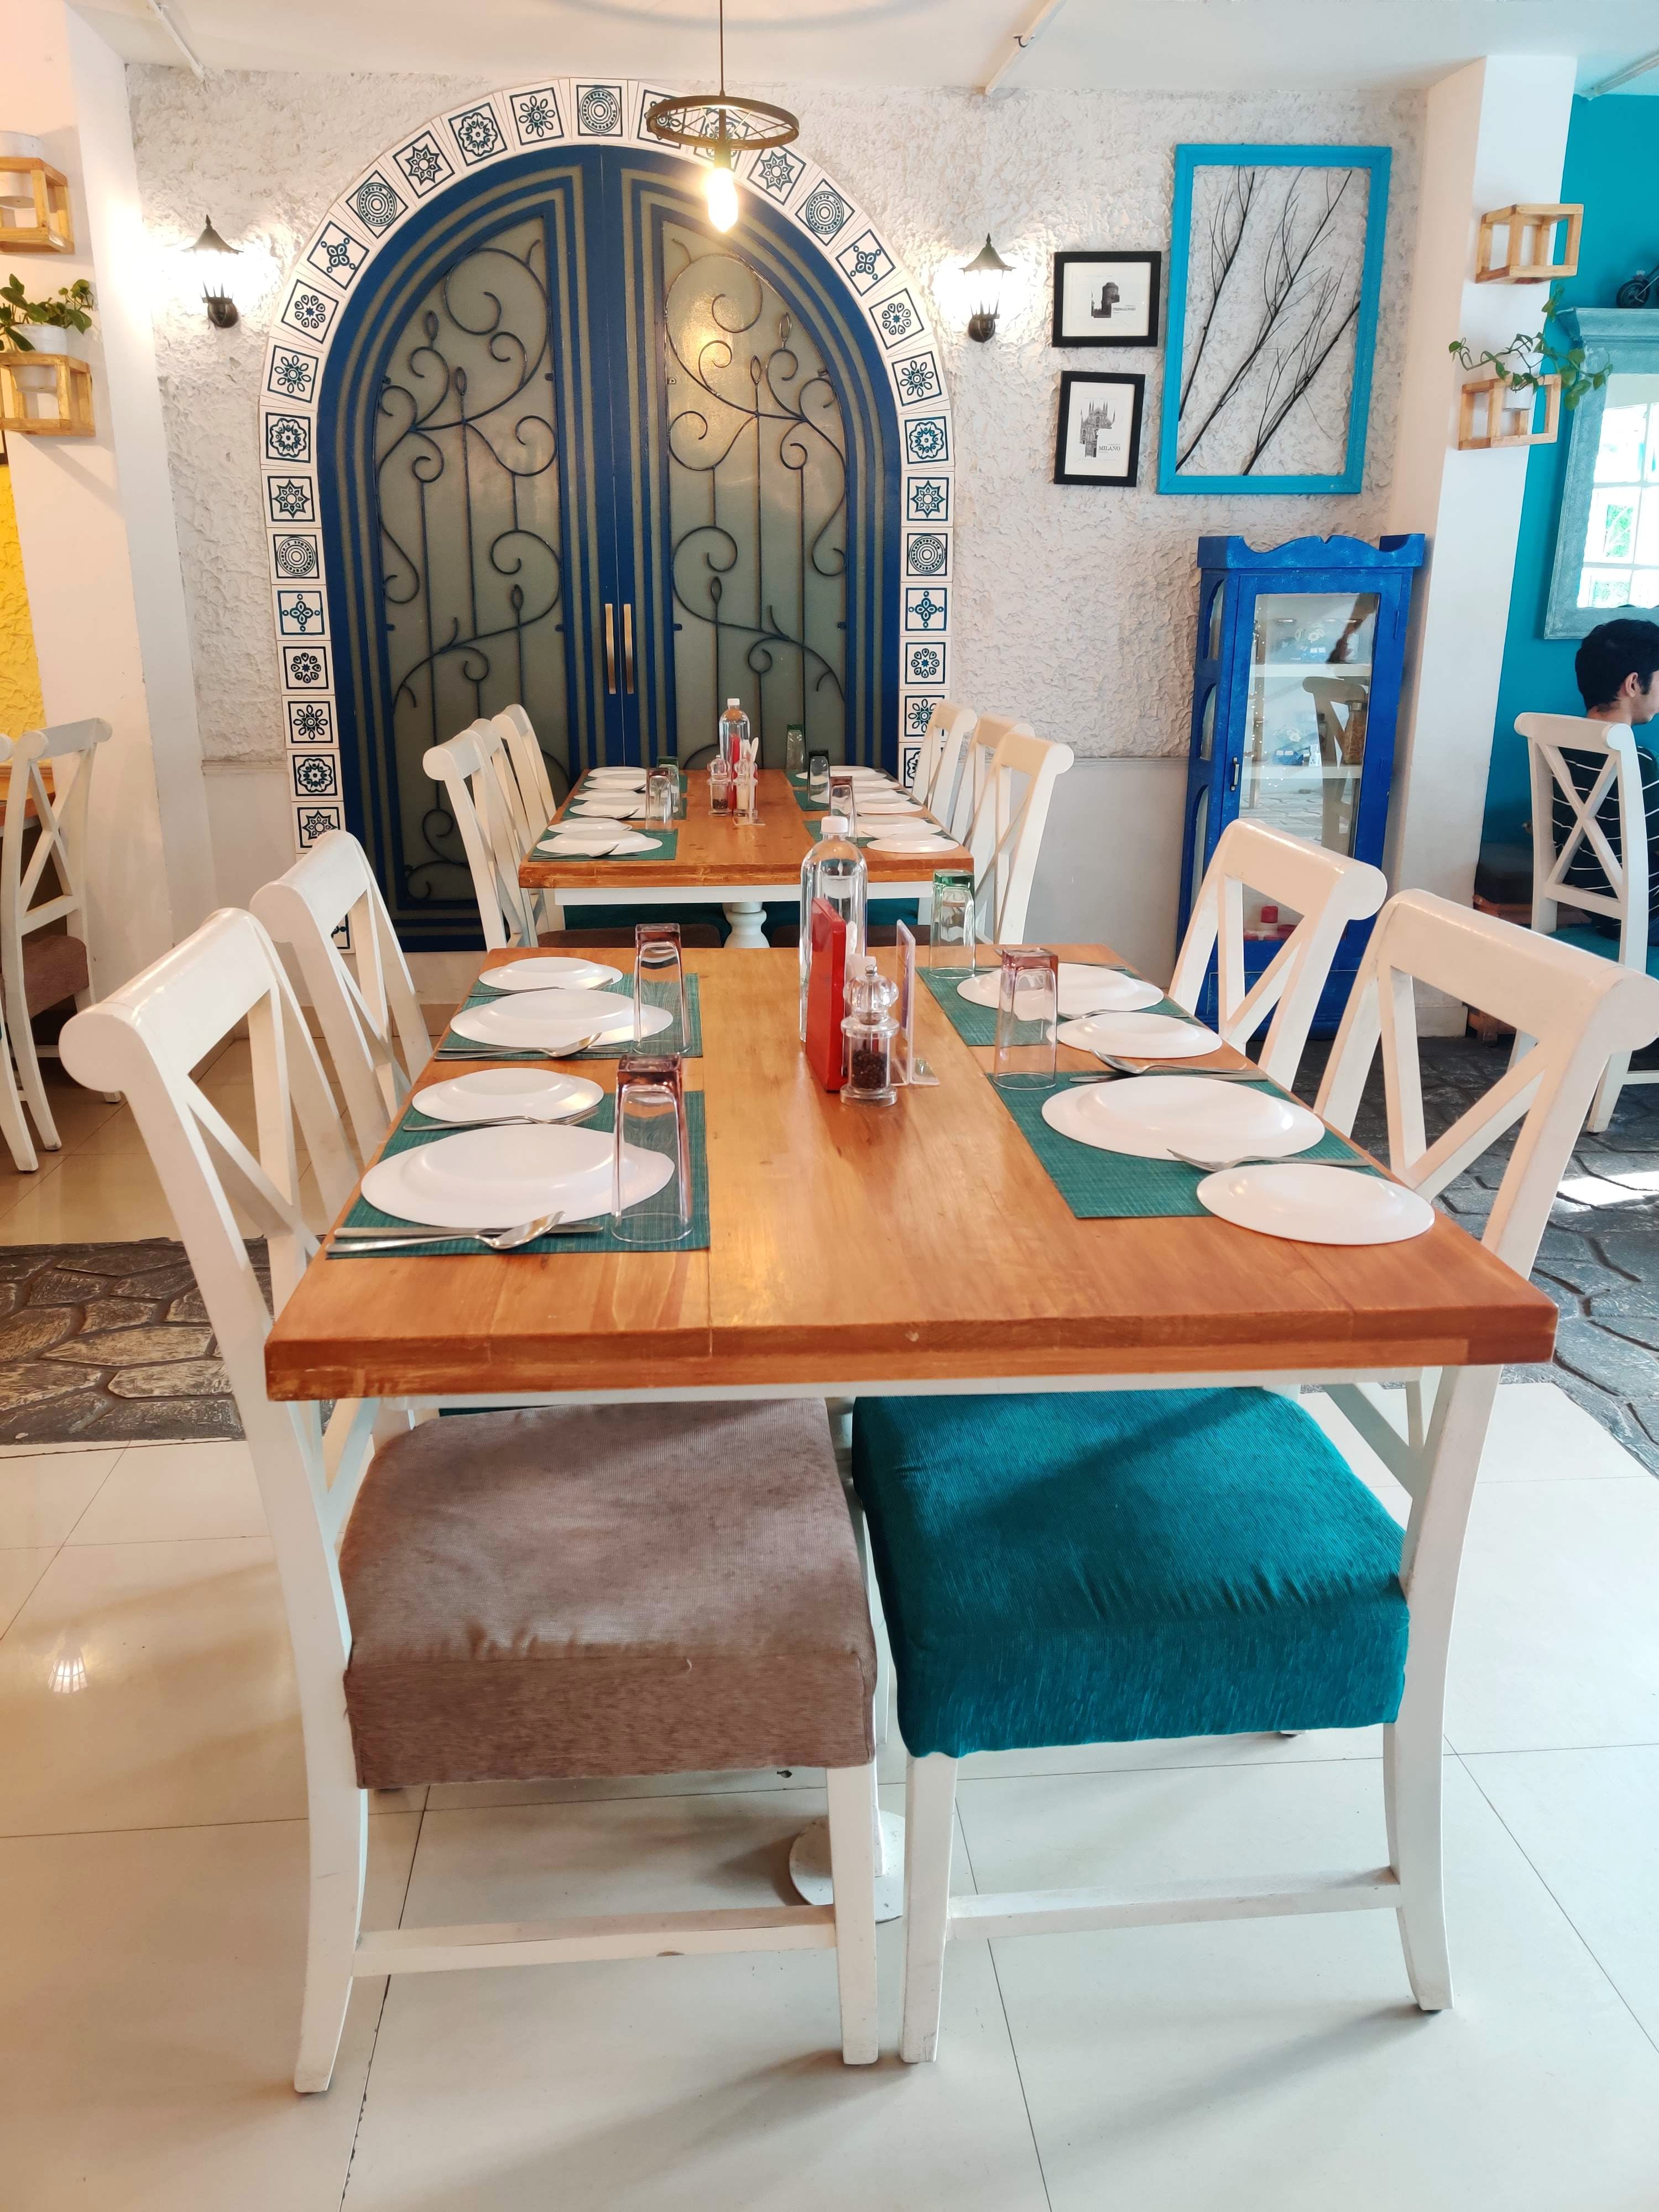 Furniture,Room,Table,Interior design,Blue,Dining room,Turquoise,Chair,Design,Building